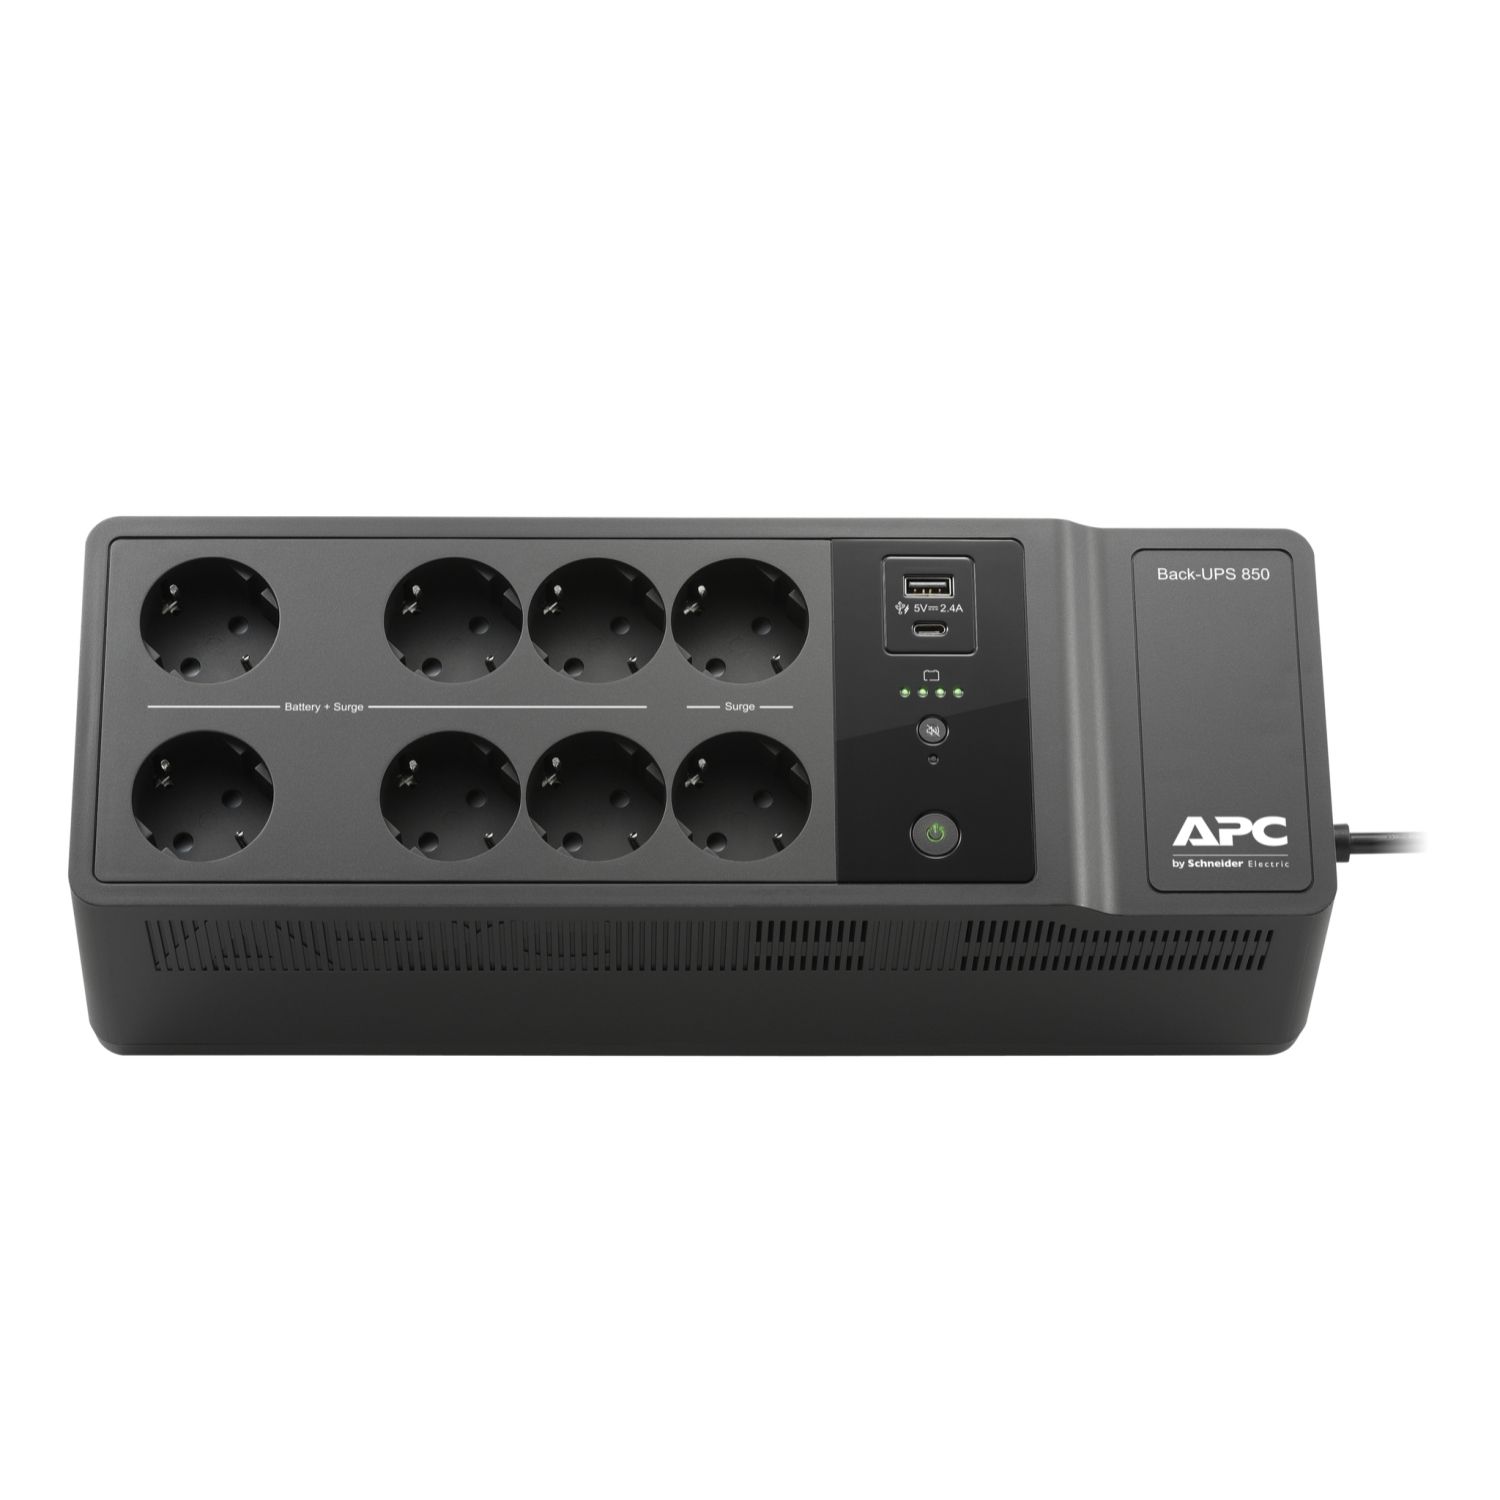 APC BE850G2-SP uninterruptible power supply (UPS) Standby (Offline) 0.85 kVA 520 W 8 AC outlet(s)_3